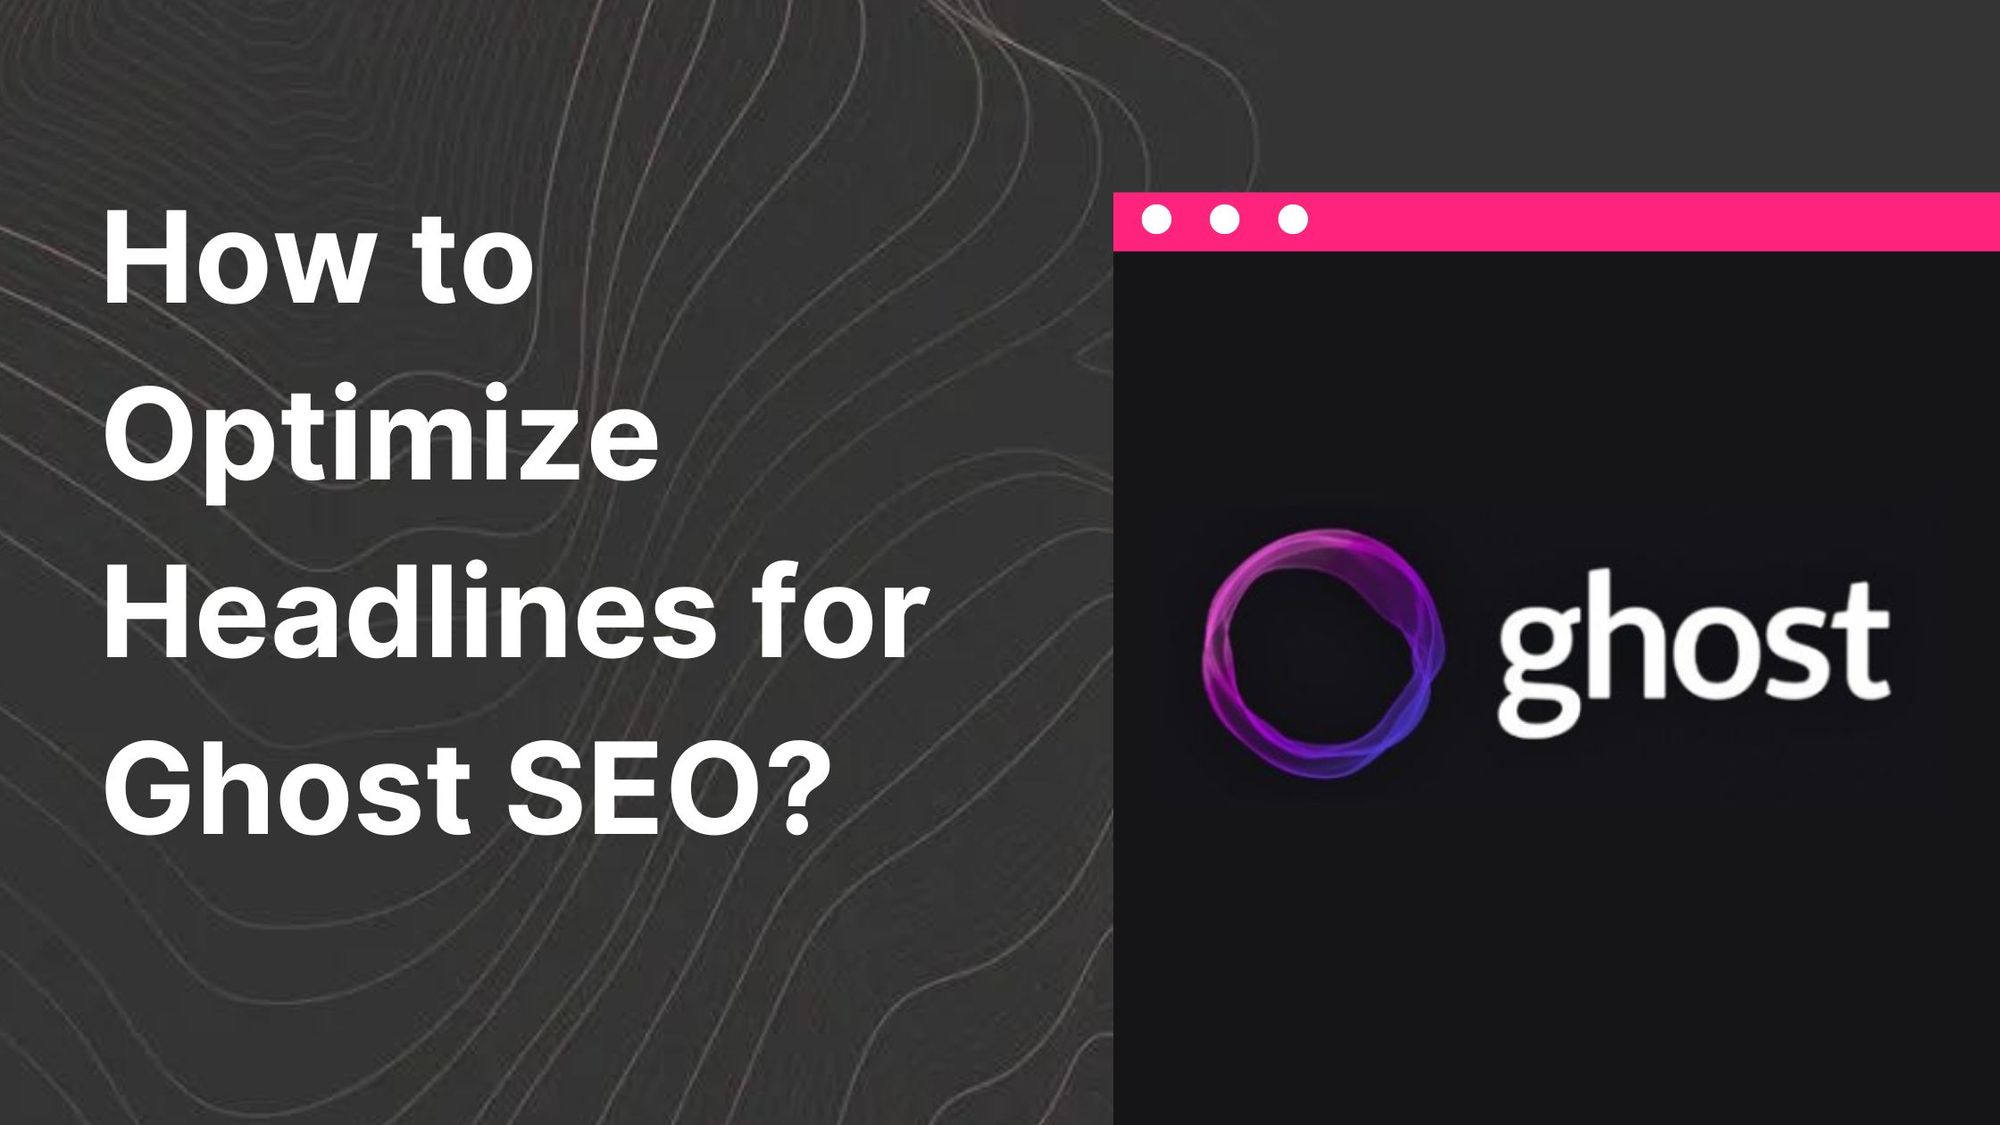 How to Optimize Headlines for Ghost SEO